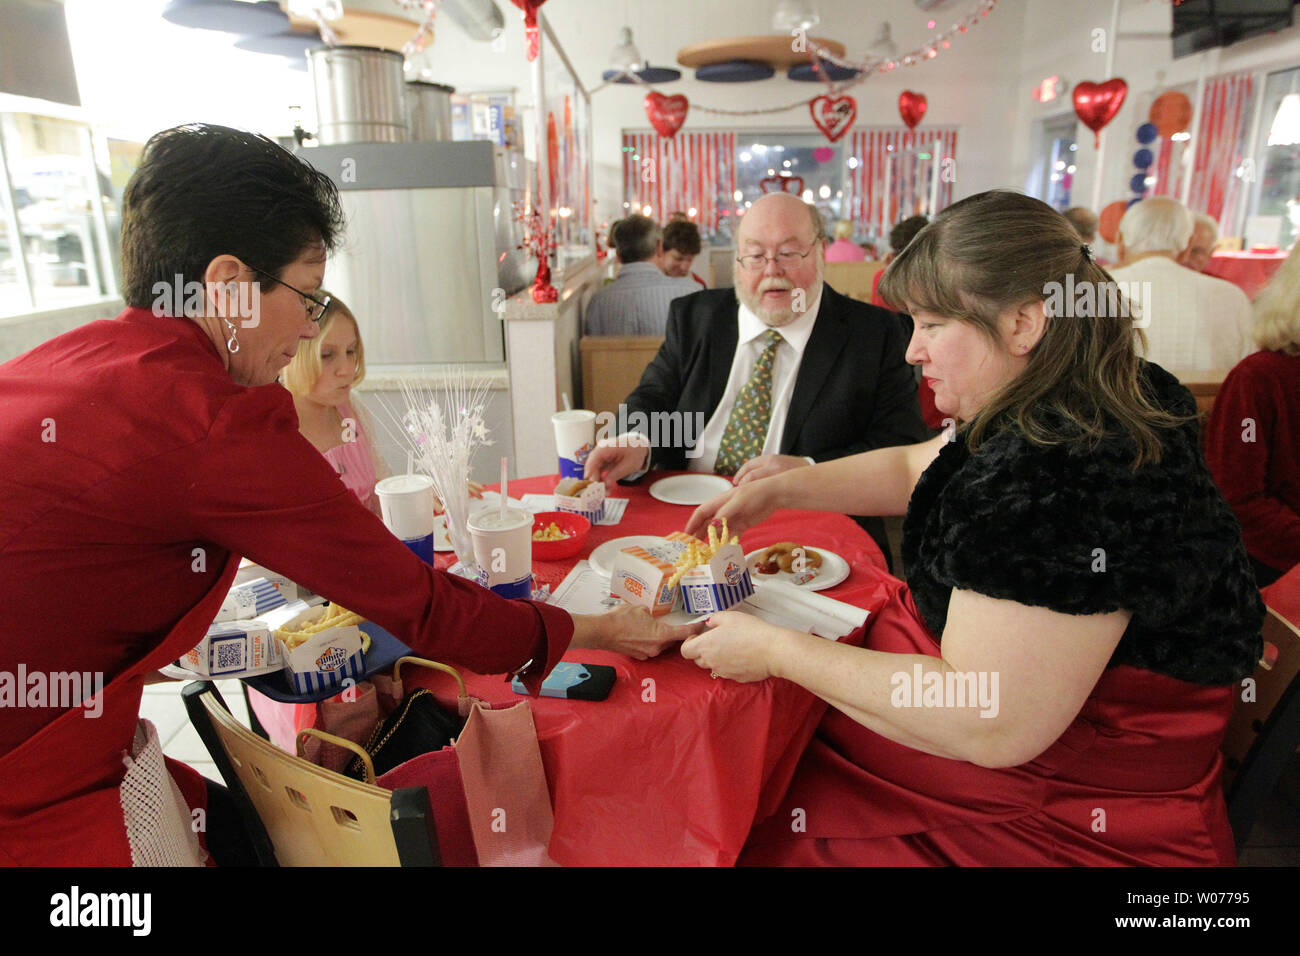 Waitress Nola Rose serves Joe Pinegar, his fiancee Karin Ransden and their daughter Katherin, their burgers and fries while dining at a White Castle restaurant in Kirkwood, Missouri on February 14, 2013. The burger joint, home of the 69 cent slider, converts itself on into a romantic eating establishment with tablecloths, candles and table service for dinner on Valentines Day. UPI/Bill Greenblatt Stock Photo